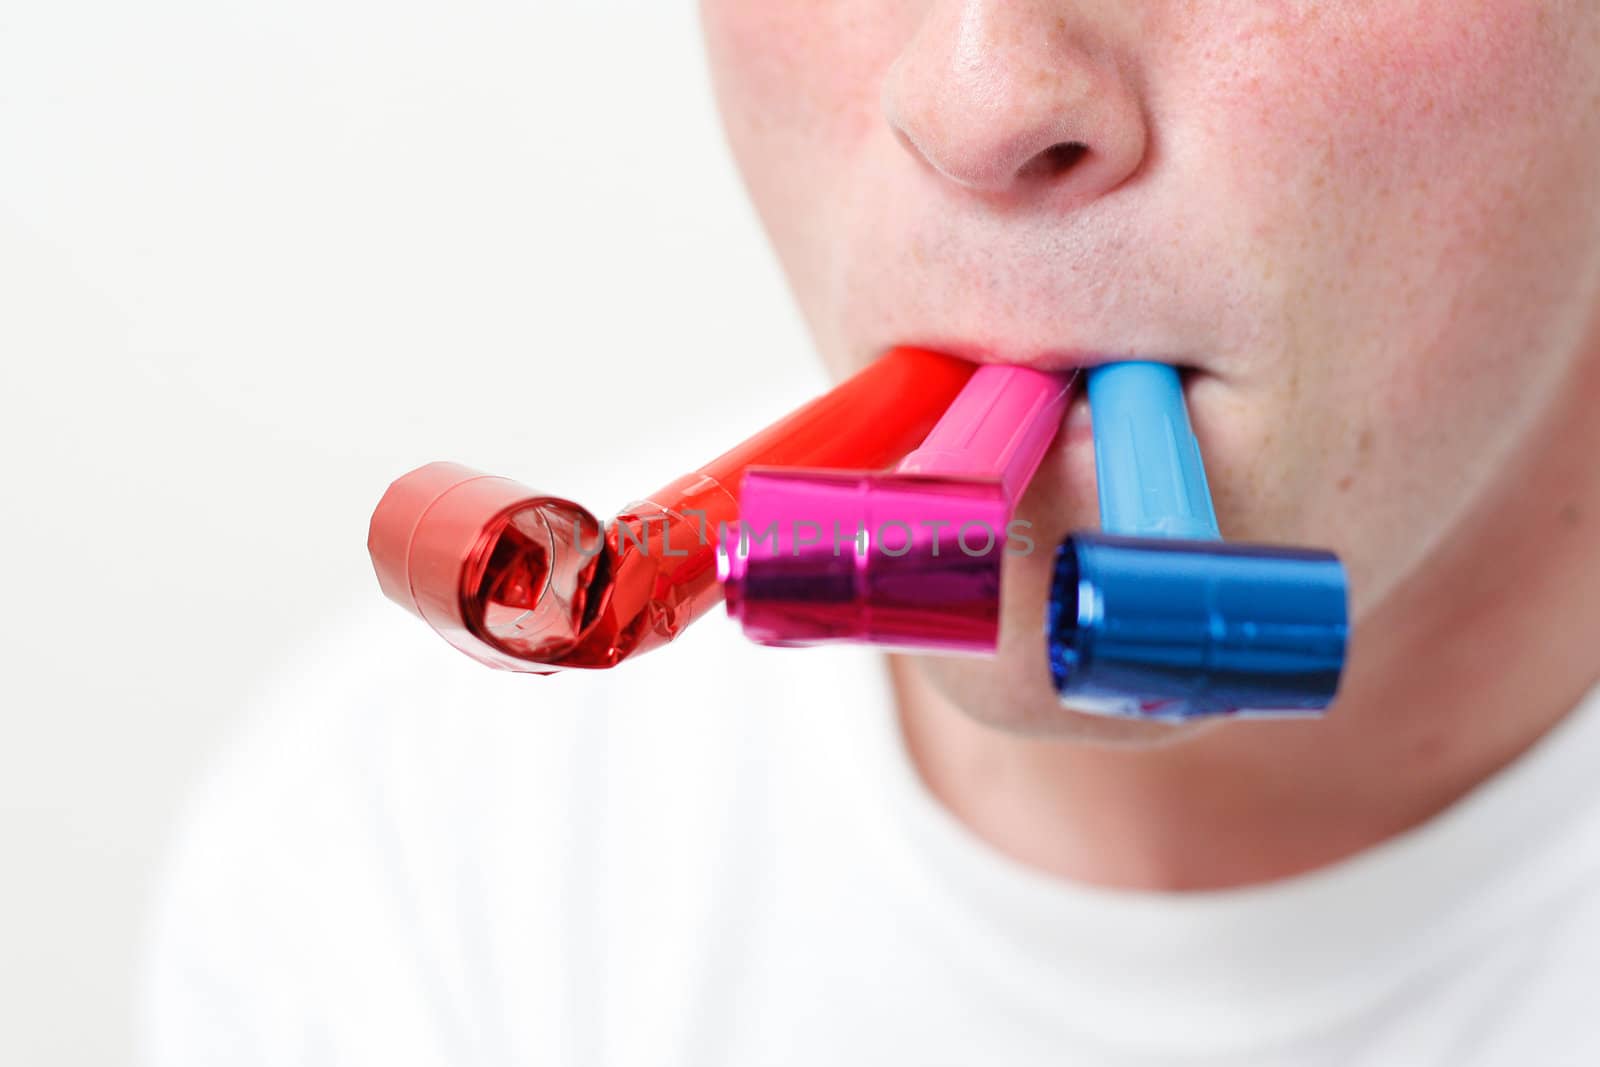 A person playing with party blowers